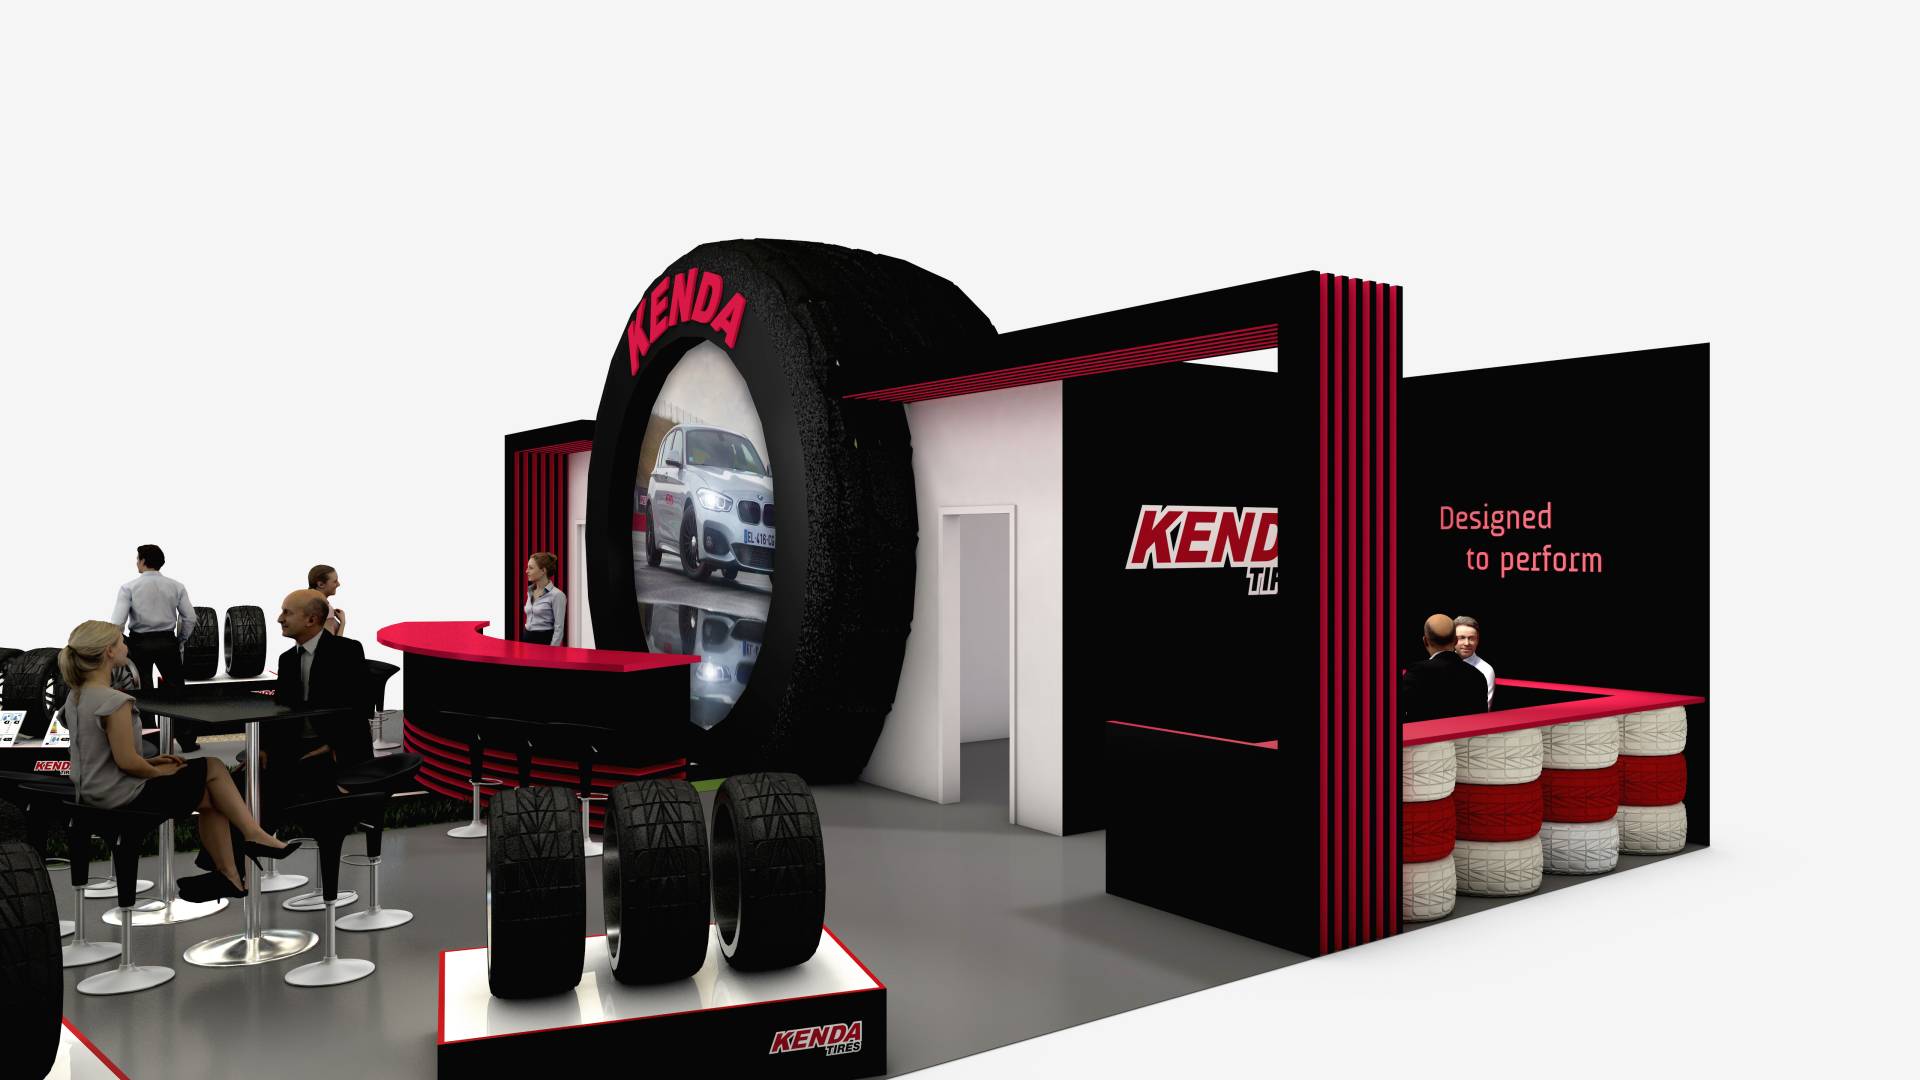 Design of the KENDA stand from the side